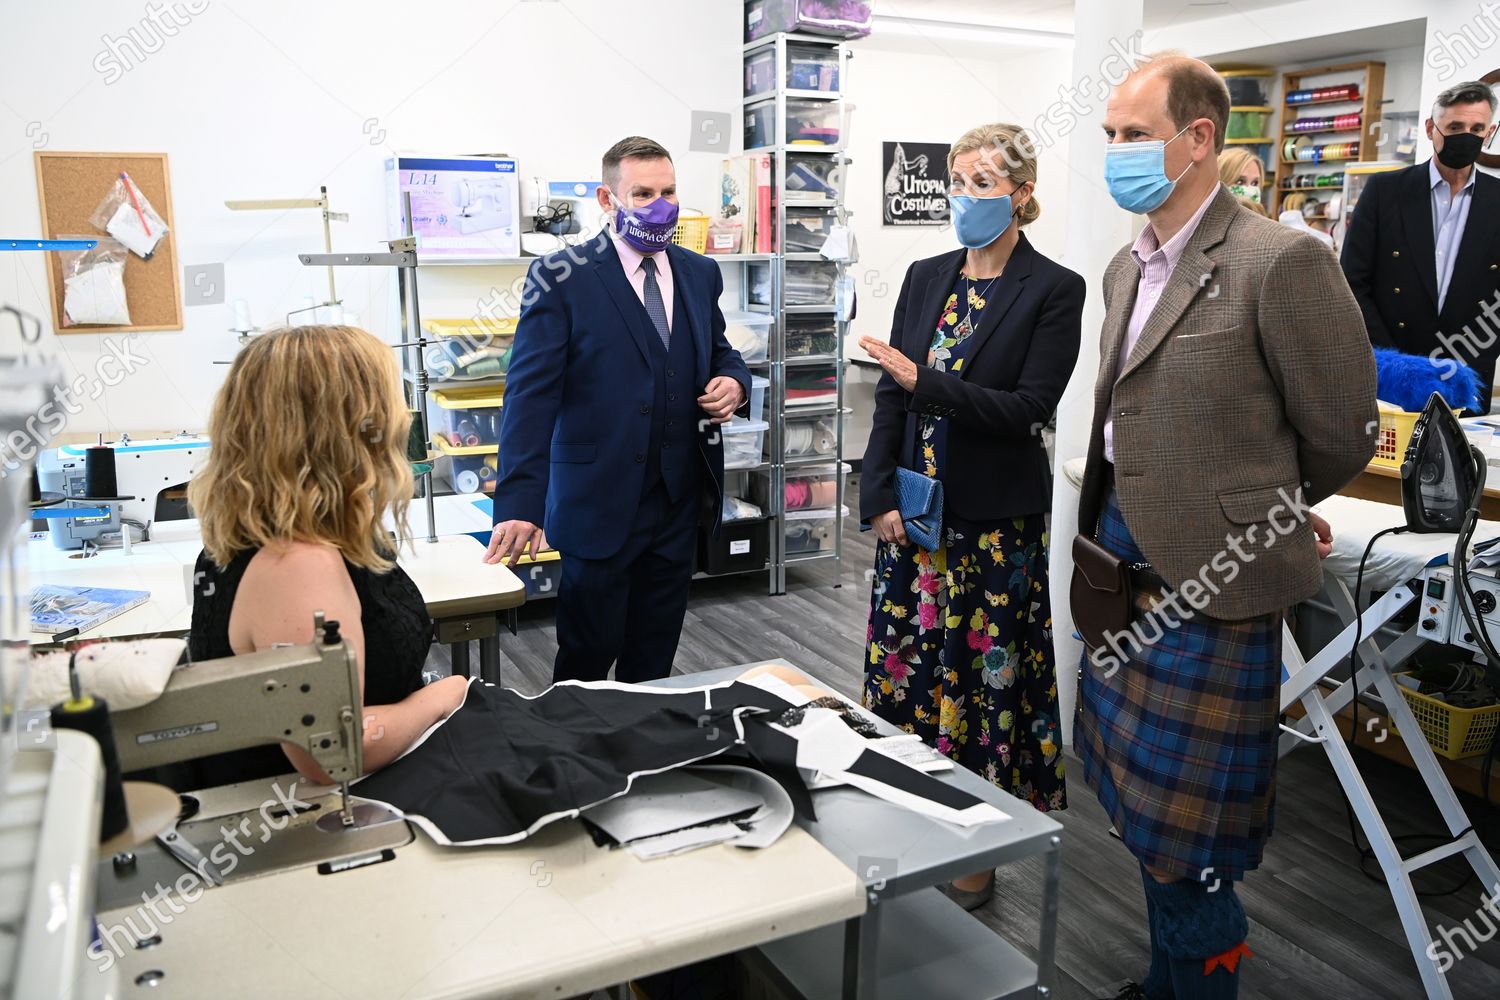 CASA REAL BRITÁNICA - Página 75 Prince-edward-and-sophie-countess-of-wessex-visit-to-utopia-costumes-forfar-scotland-uk-shutterstock-editorial-12172309j